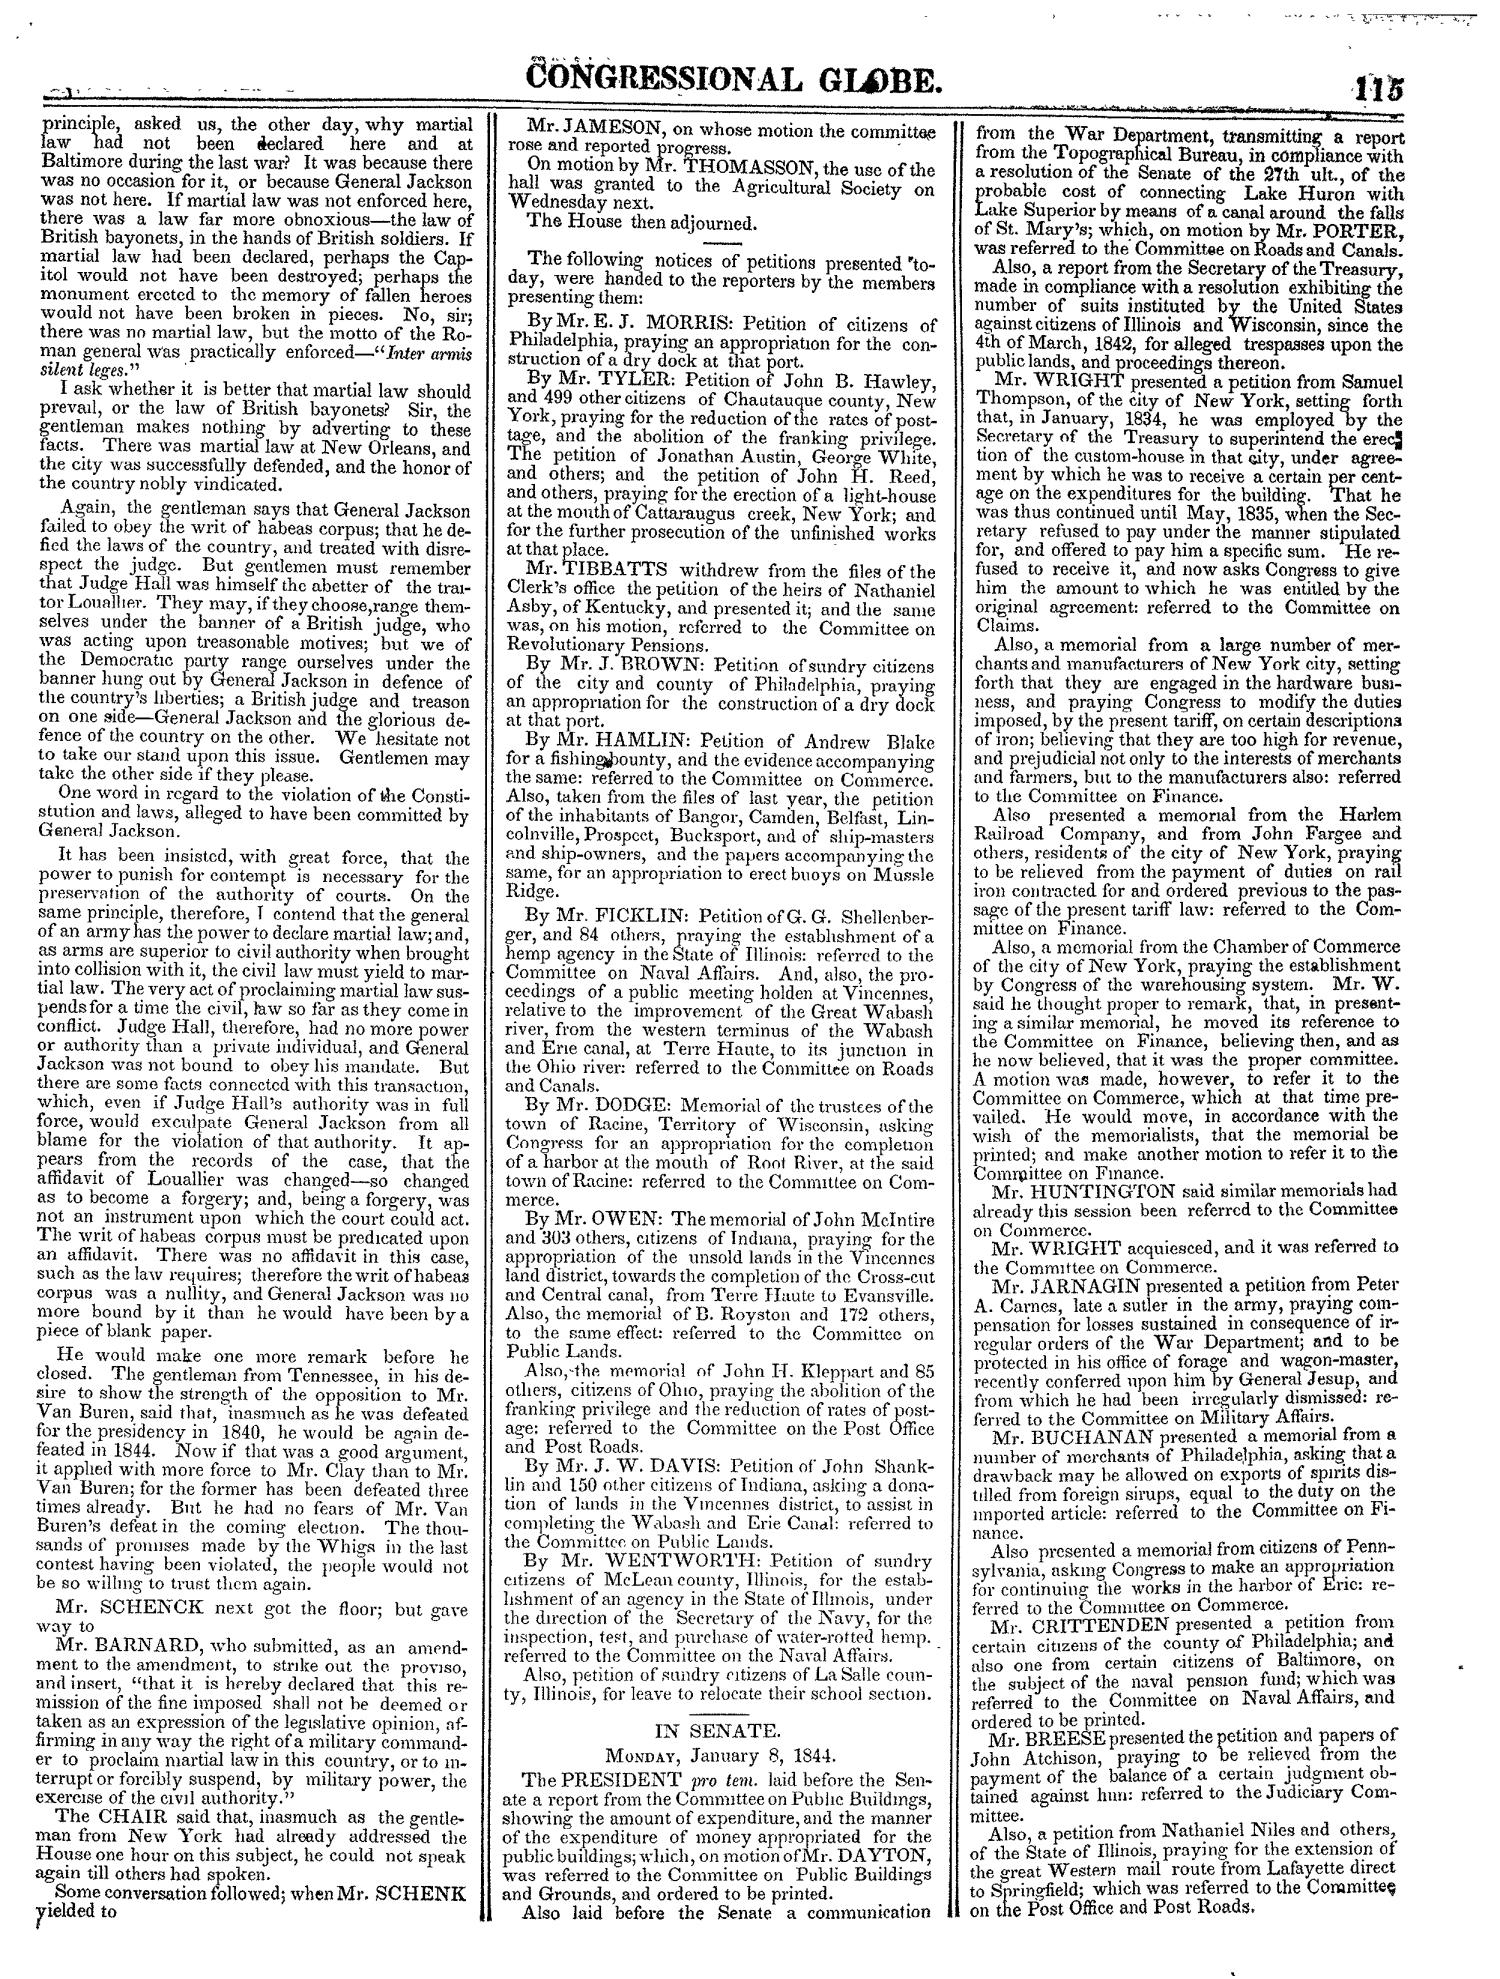 The Congressional Globe, Volume 13, Part 1: Twenty-Eighth Congress, First Session
                                                
                                                    115
                                                